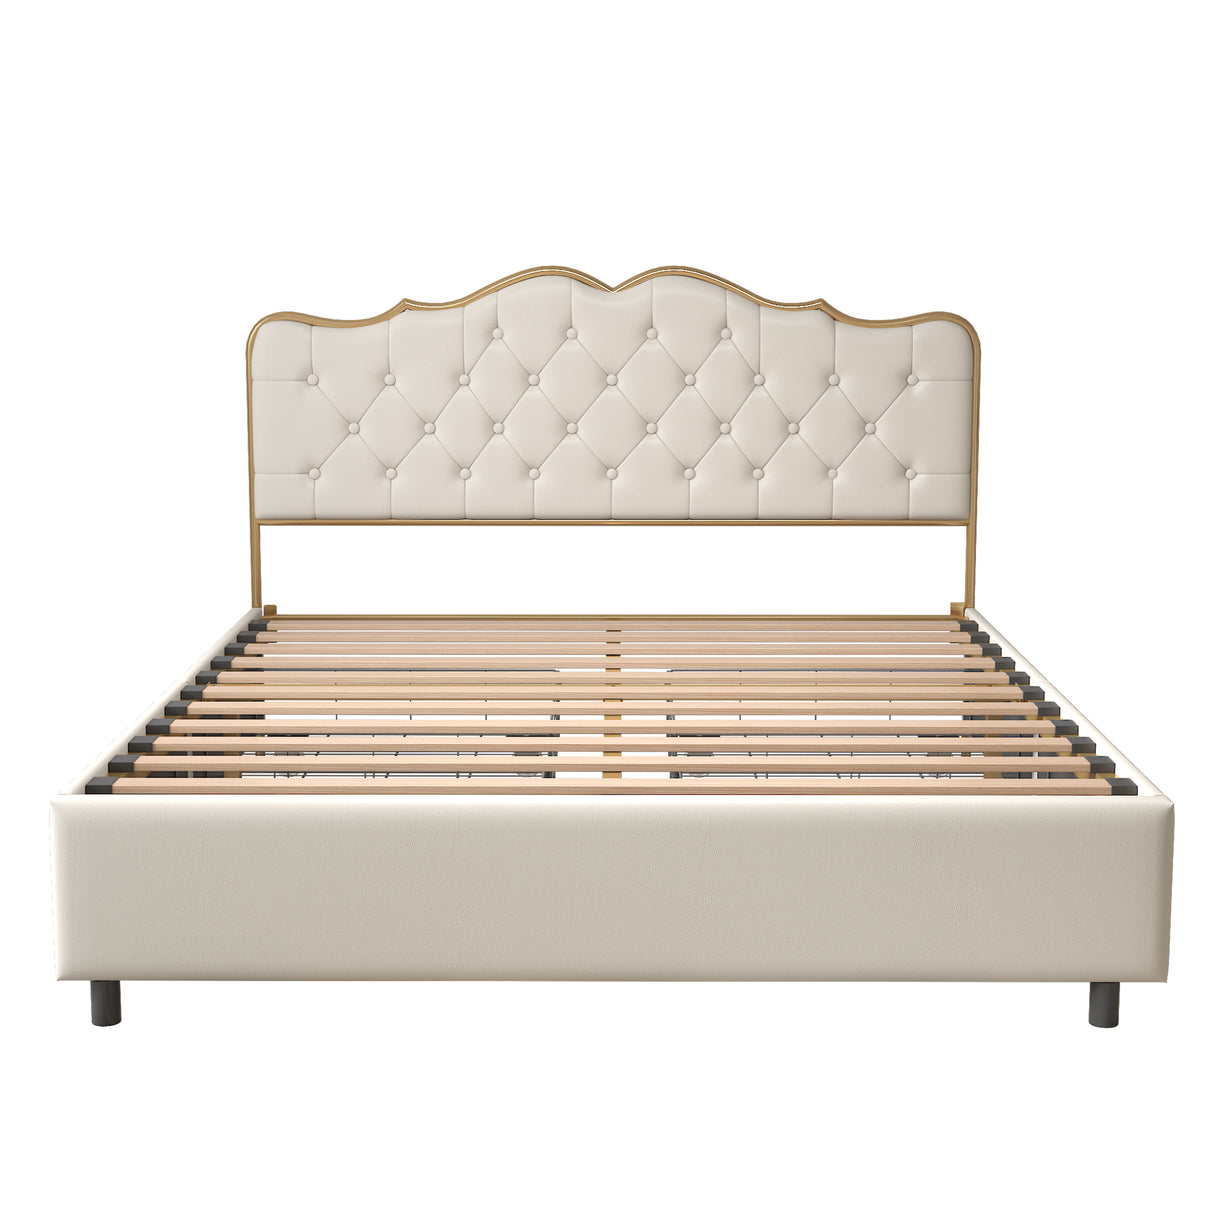 Classic buckle backrest, metal frame, solid wood ribs, with four storage drawers, sponge soft bag, comfortable and elegant atmosphere, white, Full-size, sleeping bed - Home Elegance USA